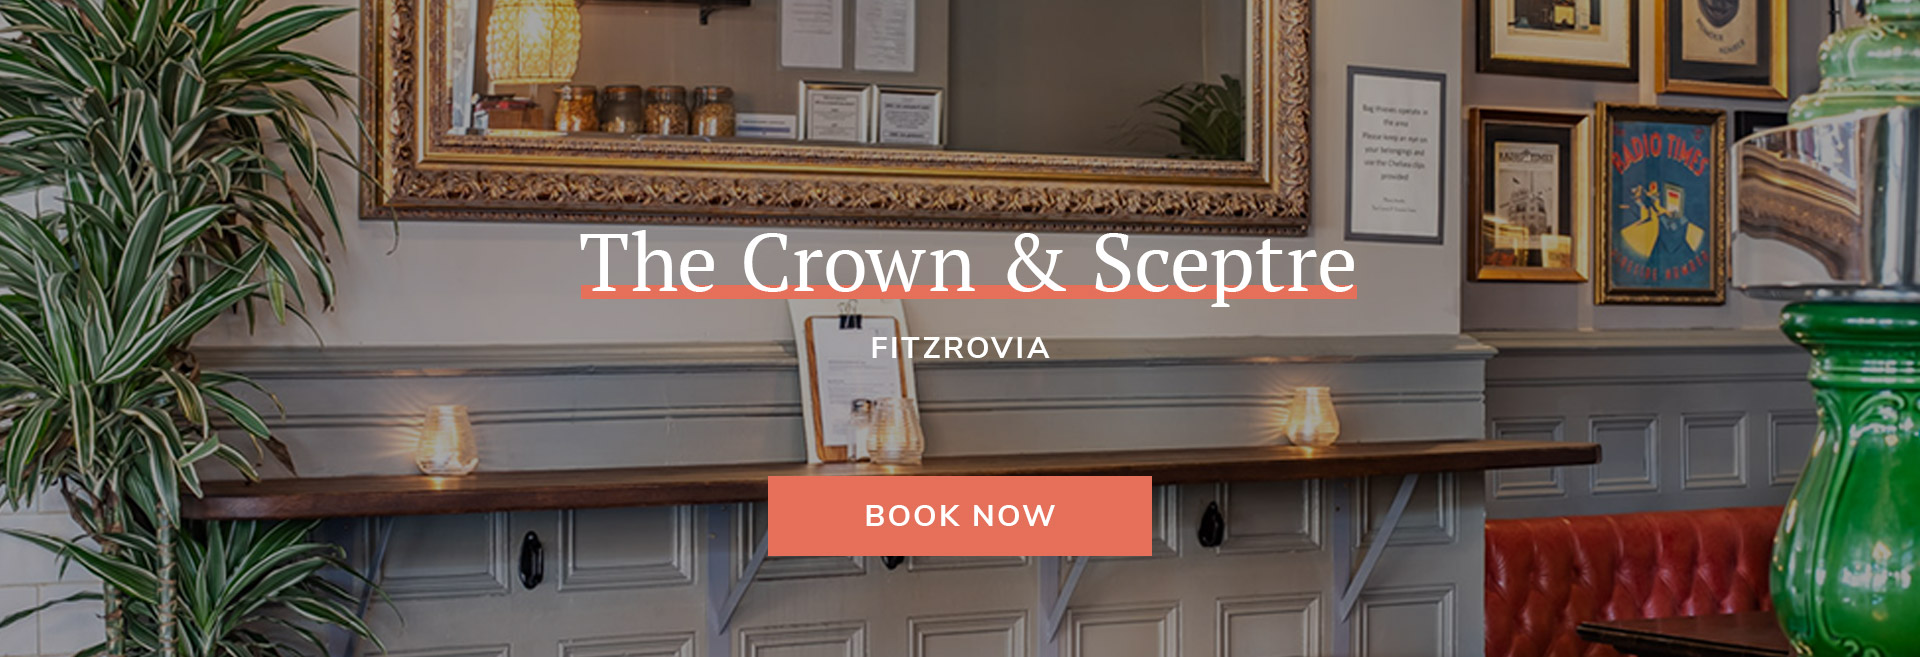 The Crown & Sceptre Banner 3